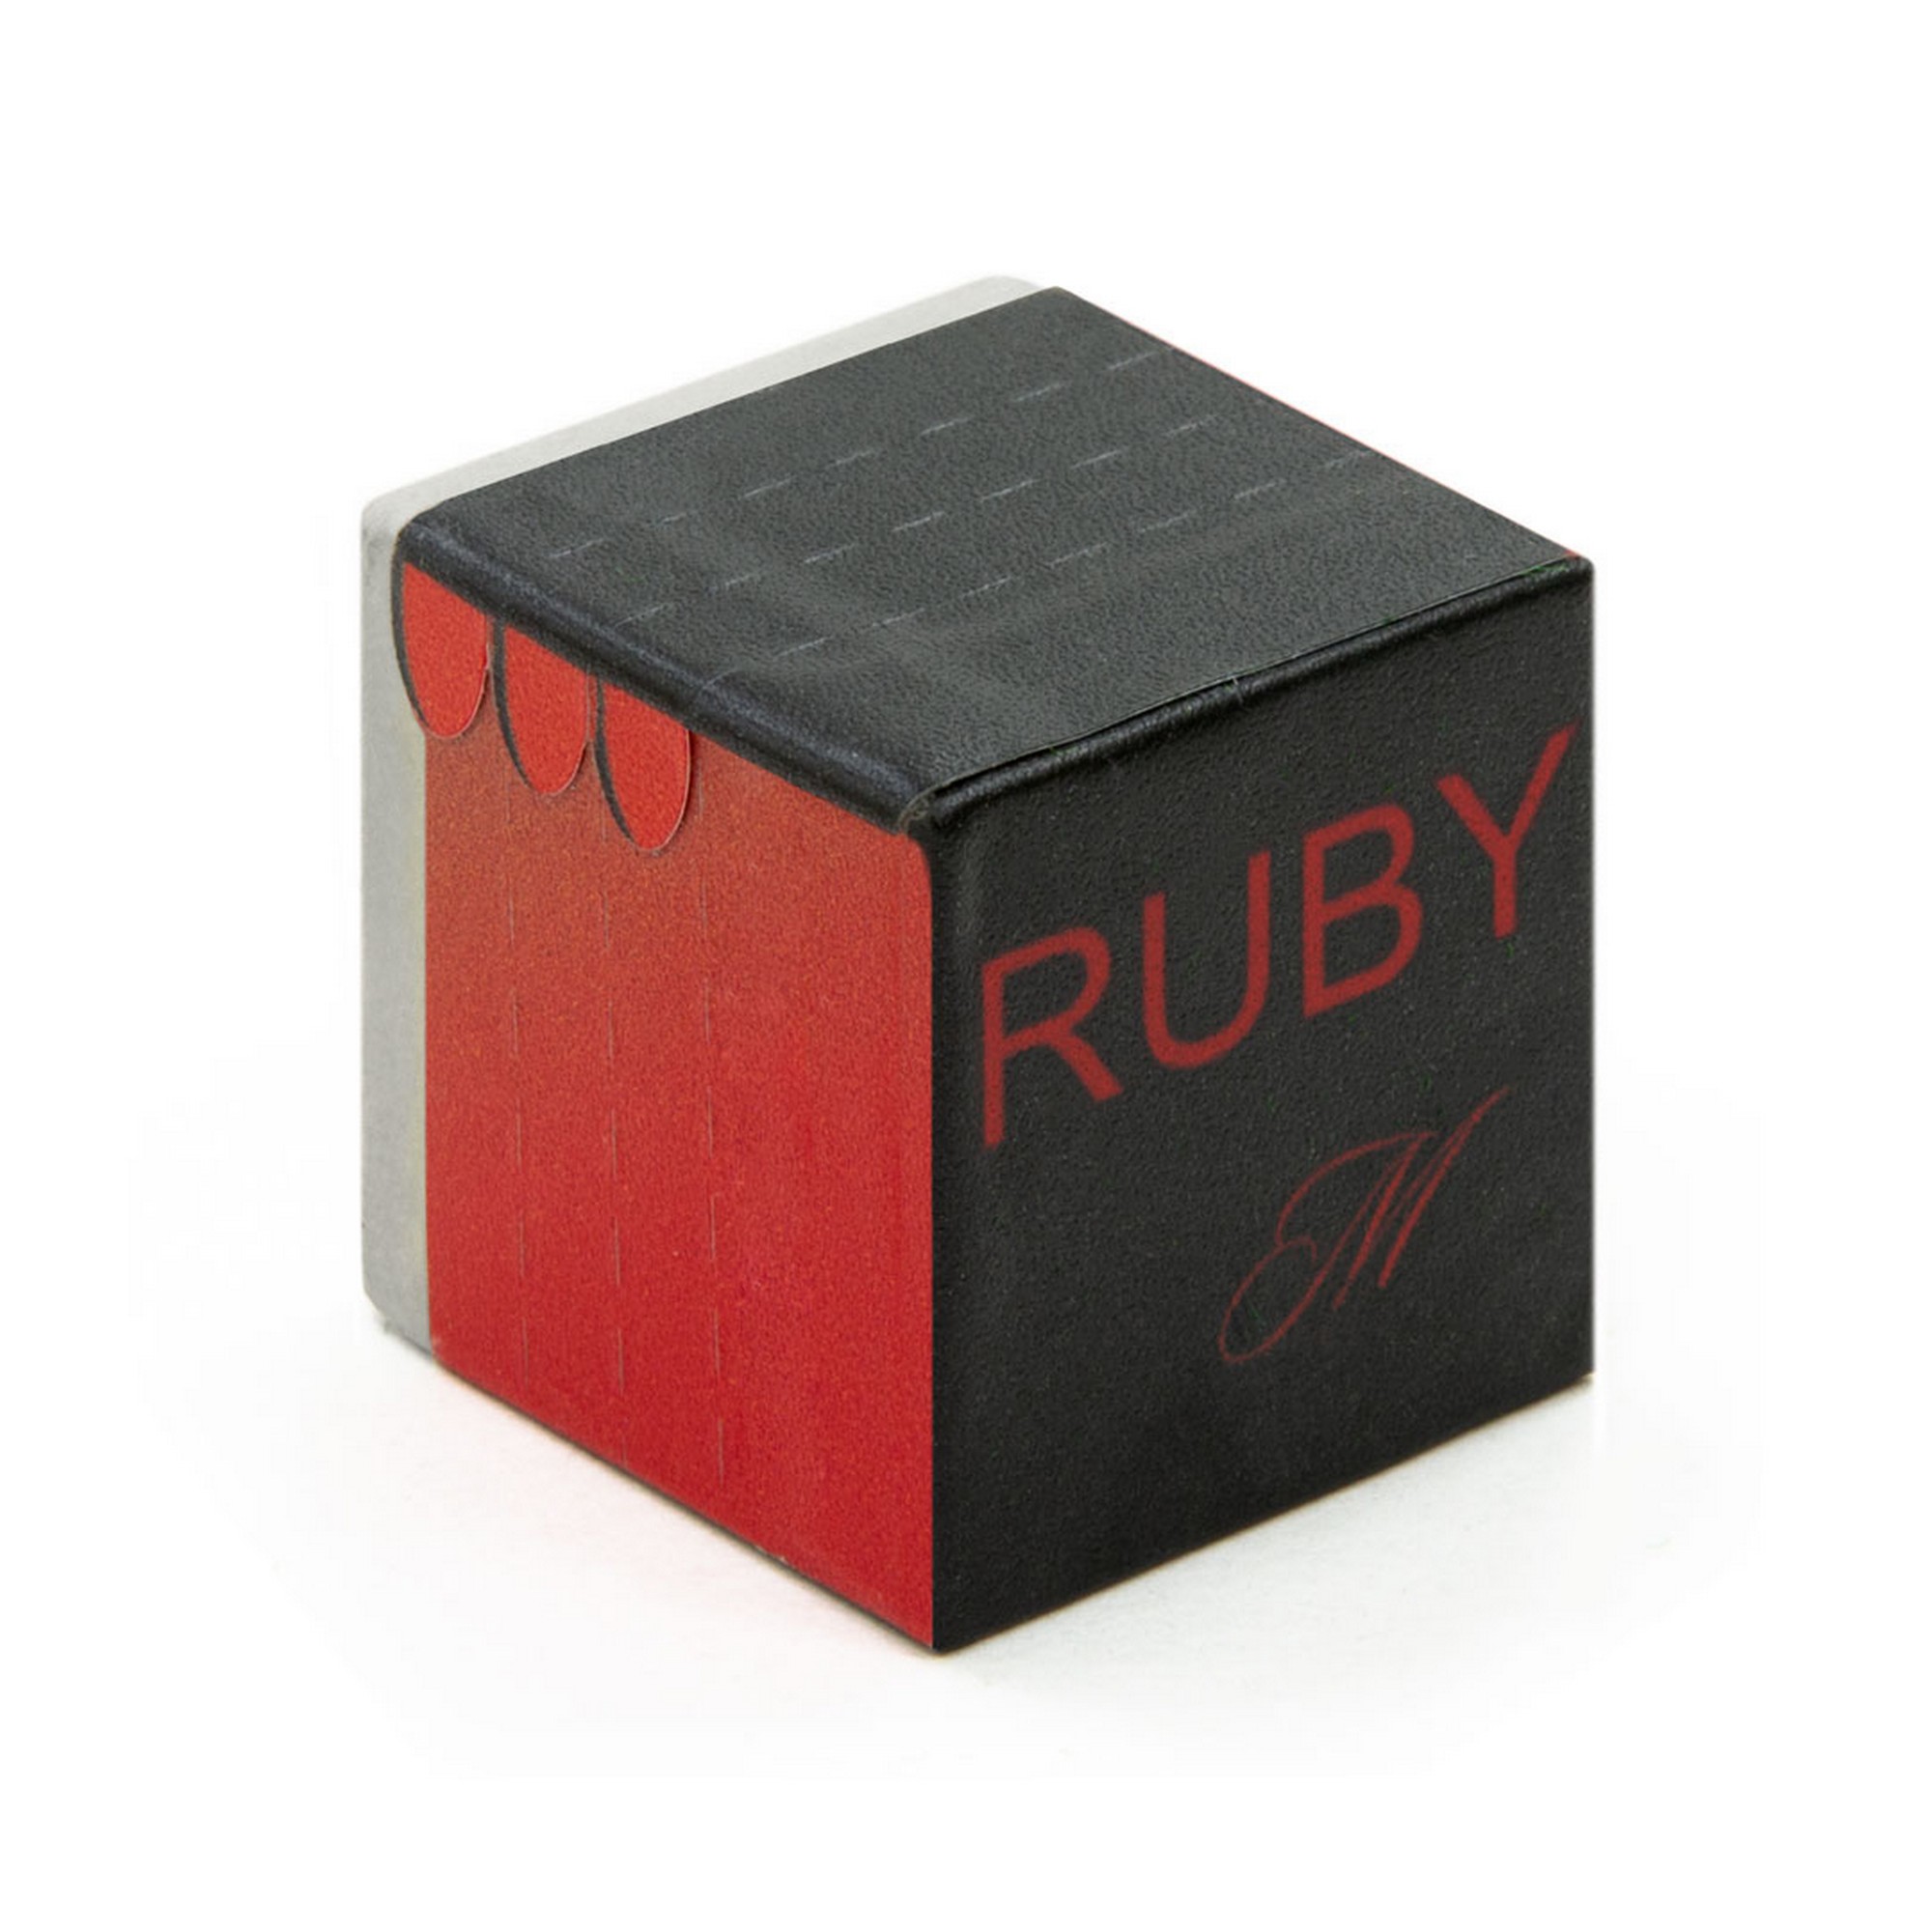  Weekend  quot;Ruby quot; .  45.031.00.0 